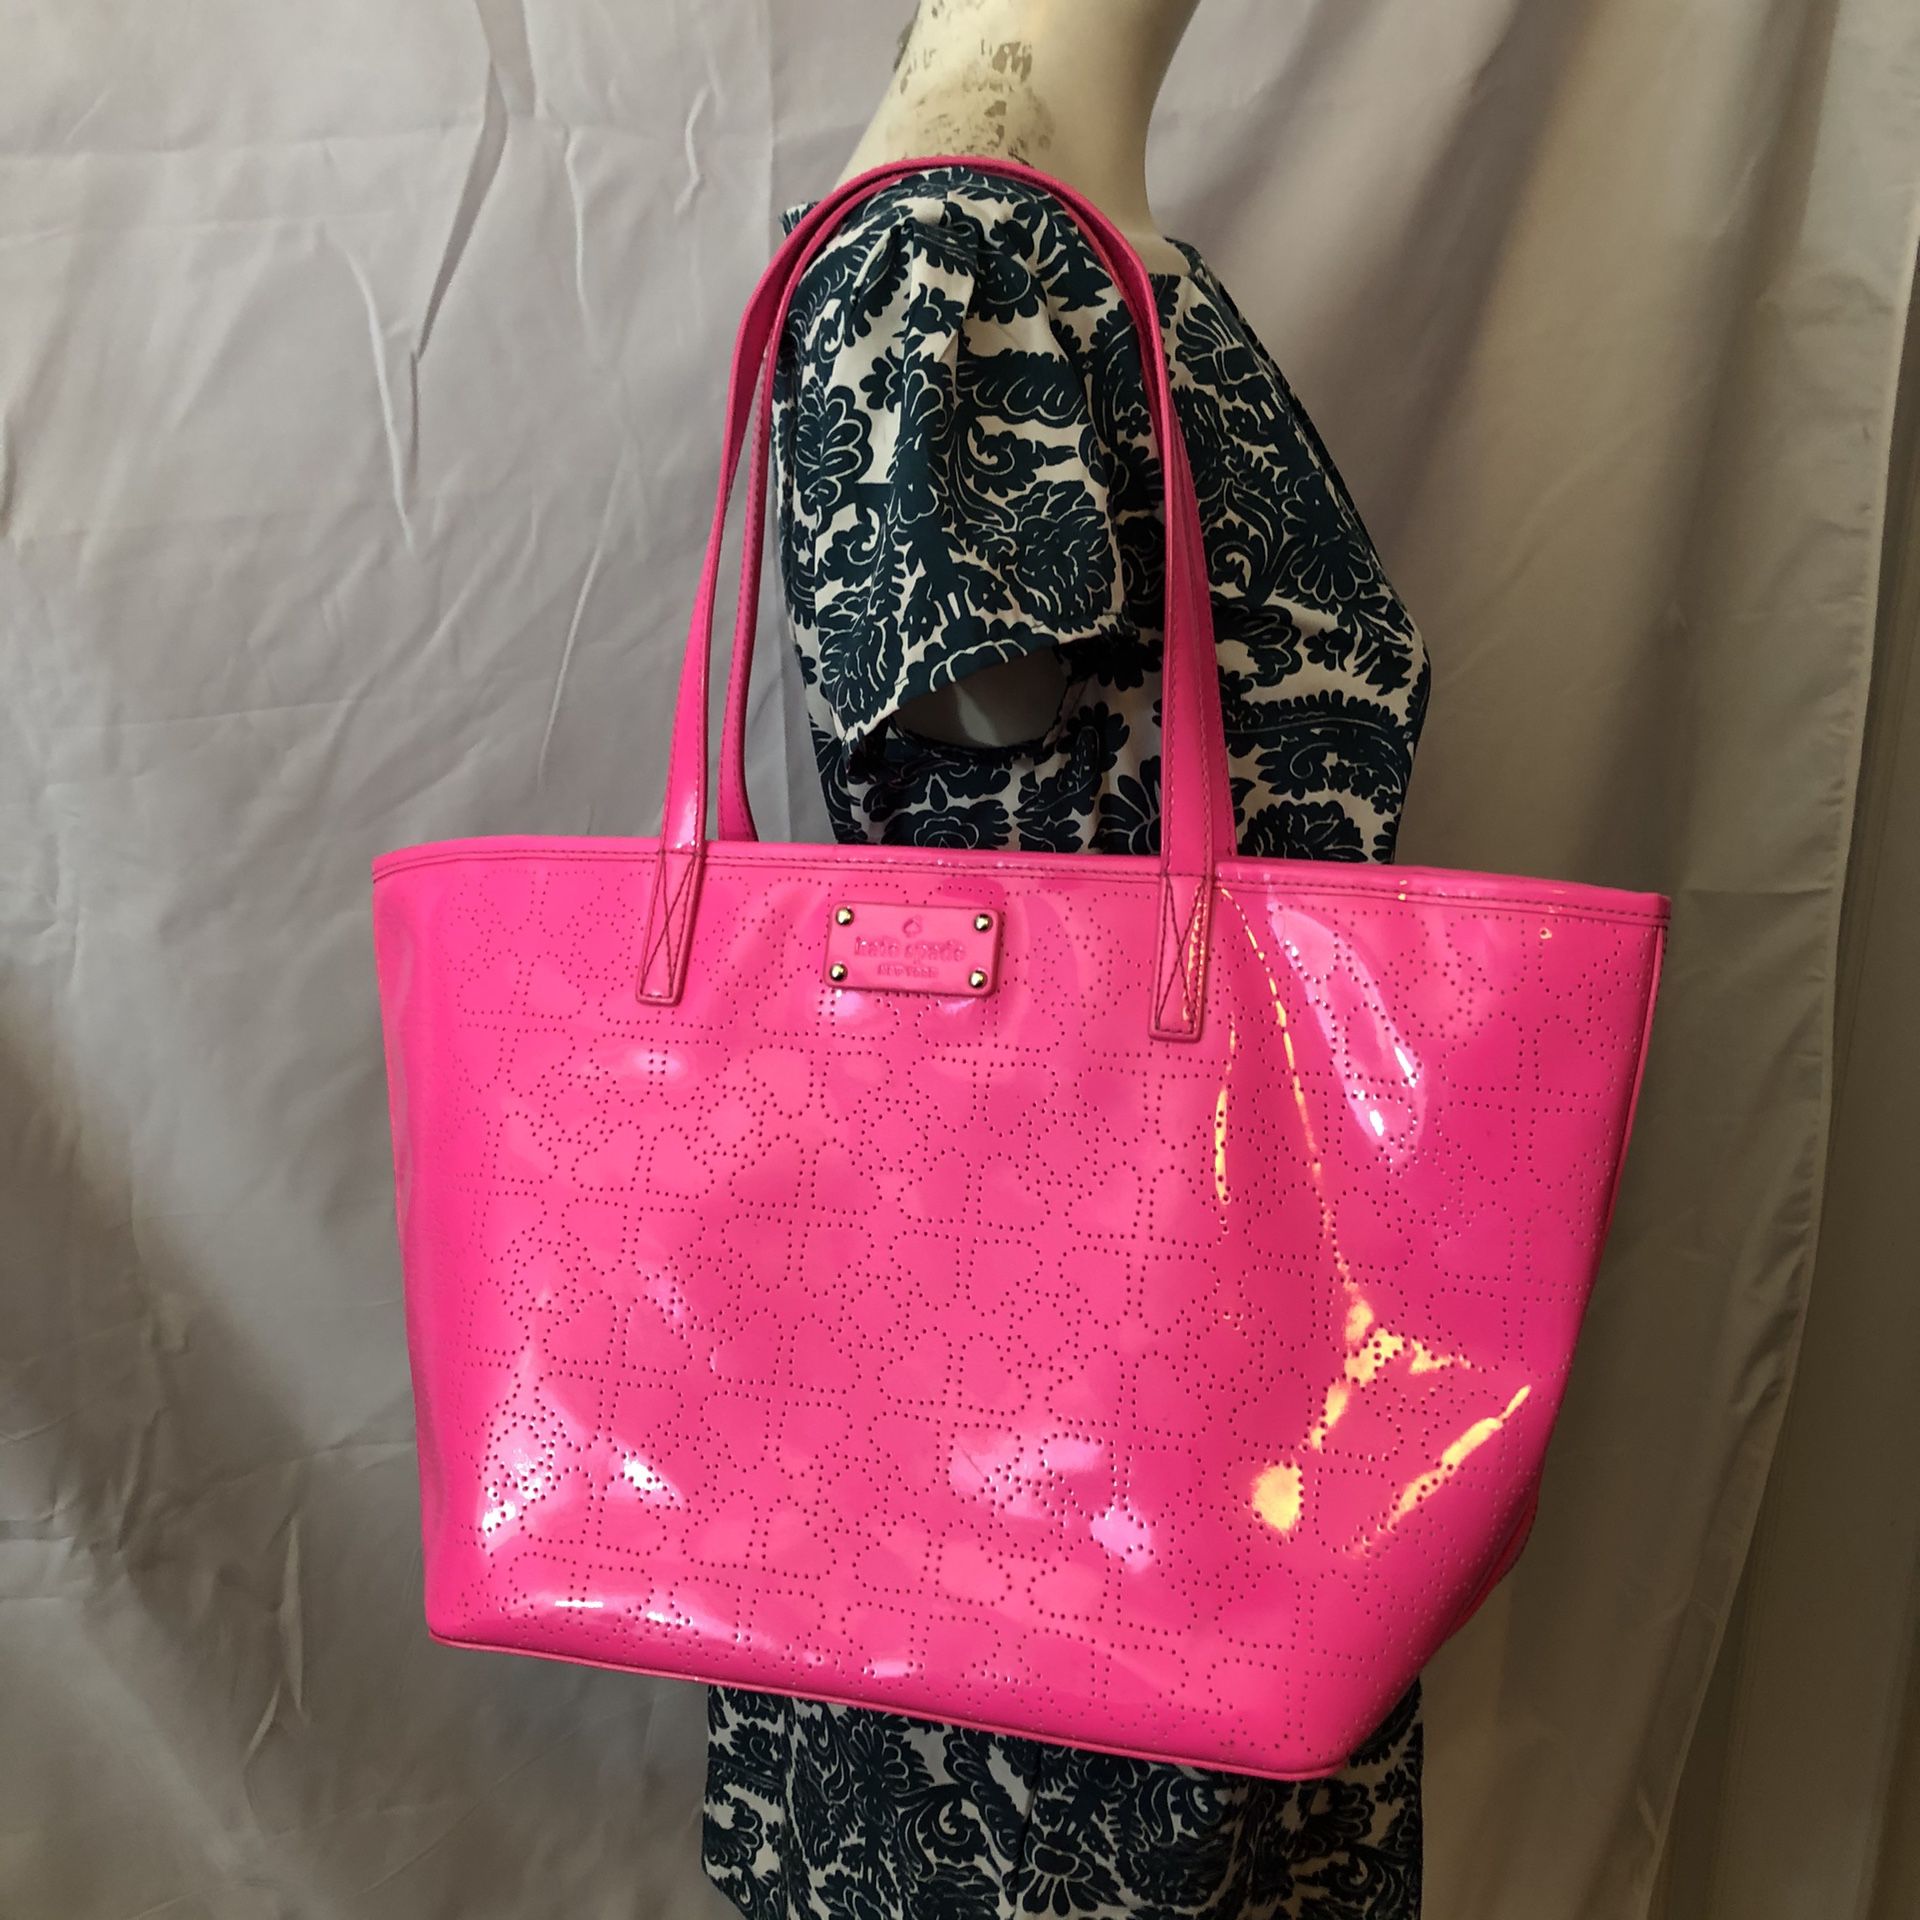 Kate Spade pink polka dot tote purse for Sale in Poway, CA - OfferUp